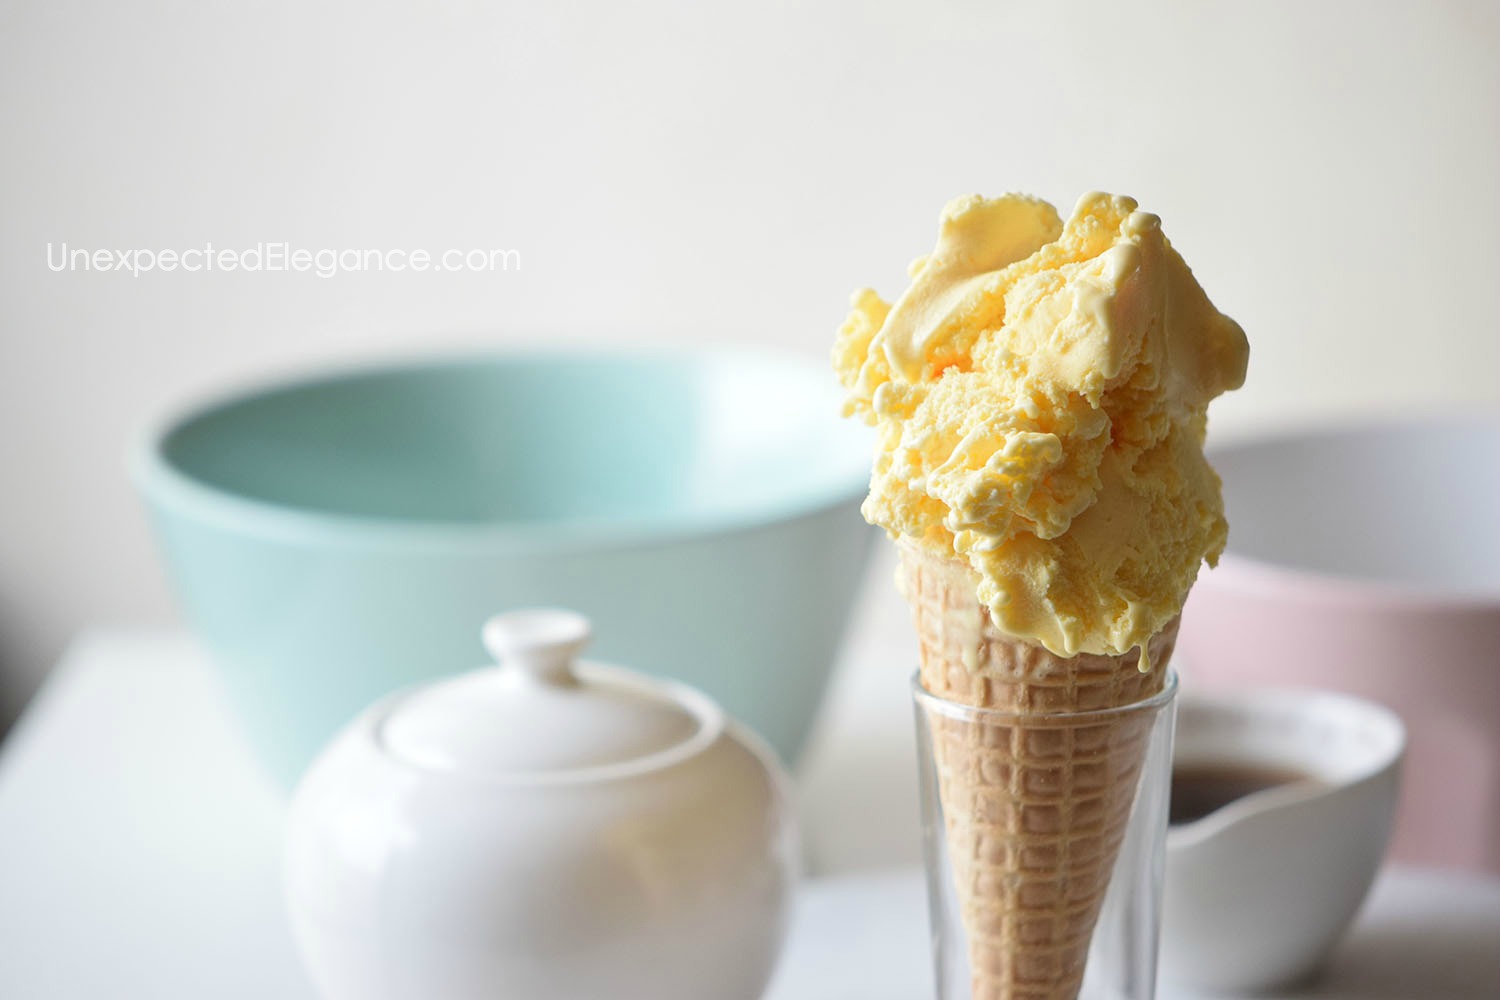 Want a treat to help you cool off this summer? Try this delicious Honey Ice Cream recipe!